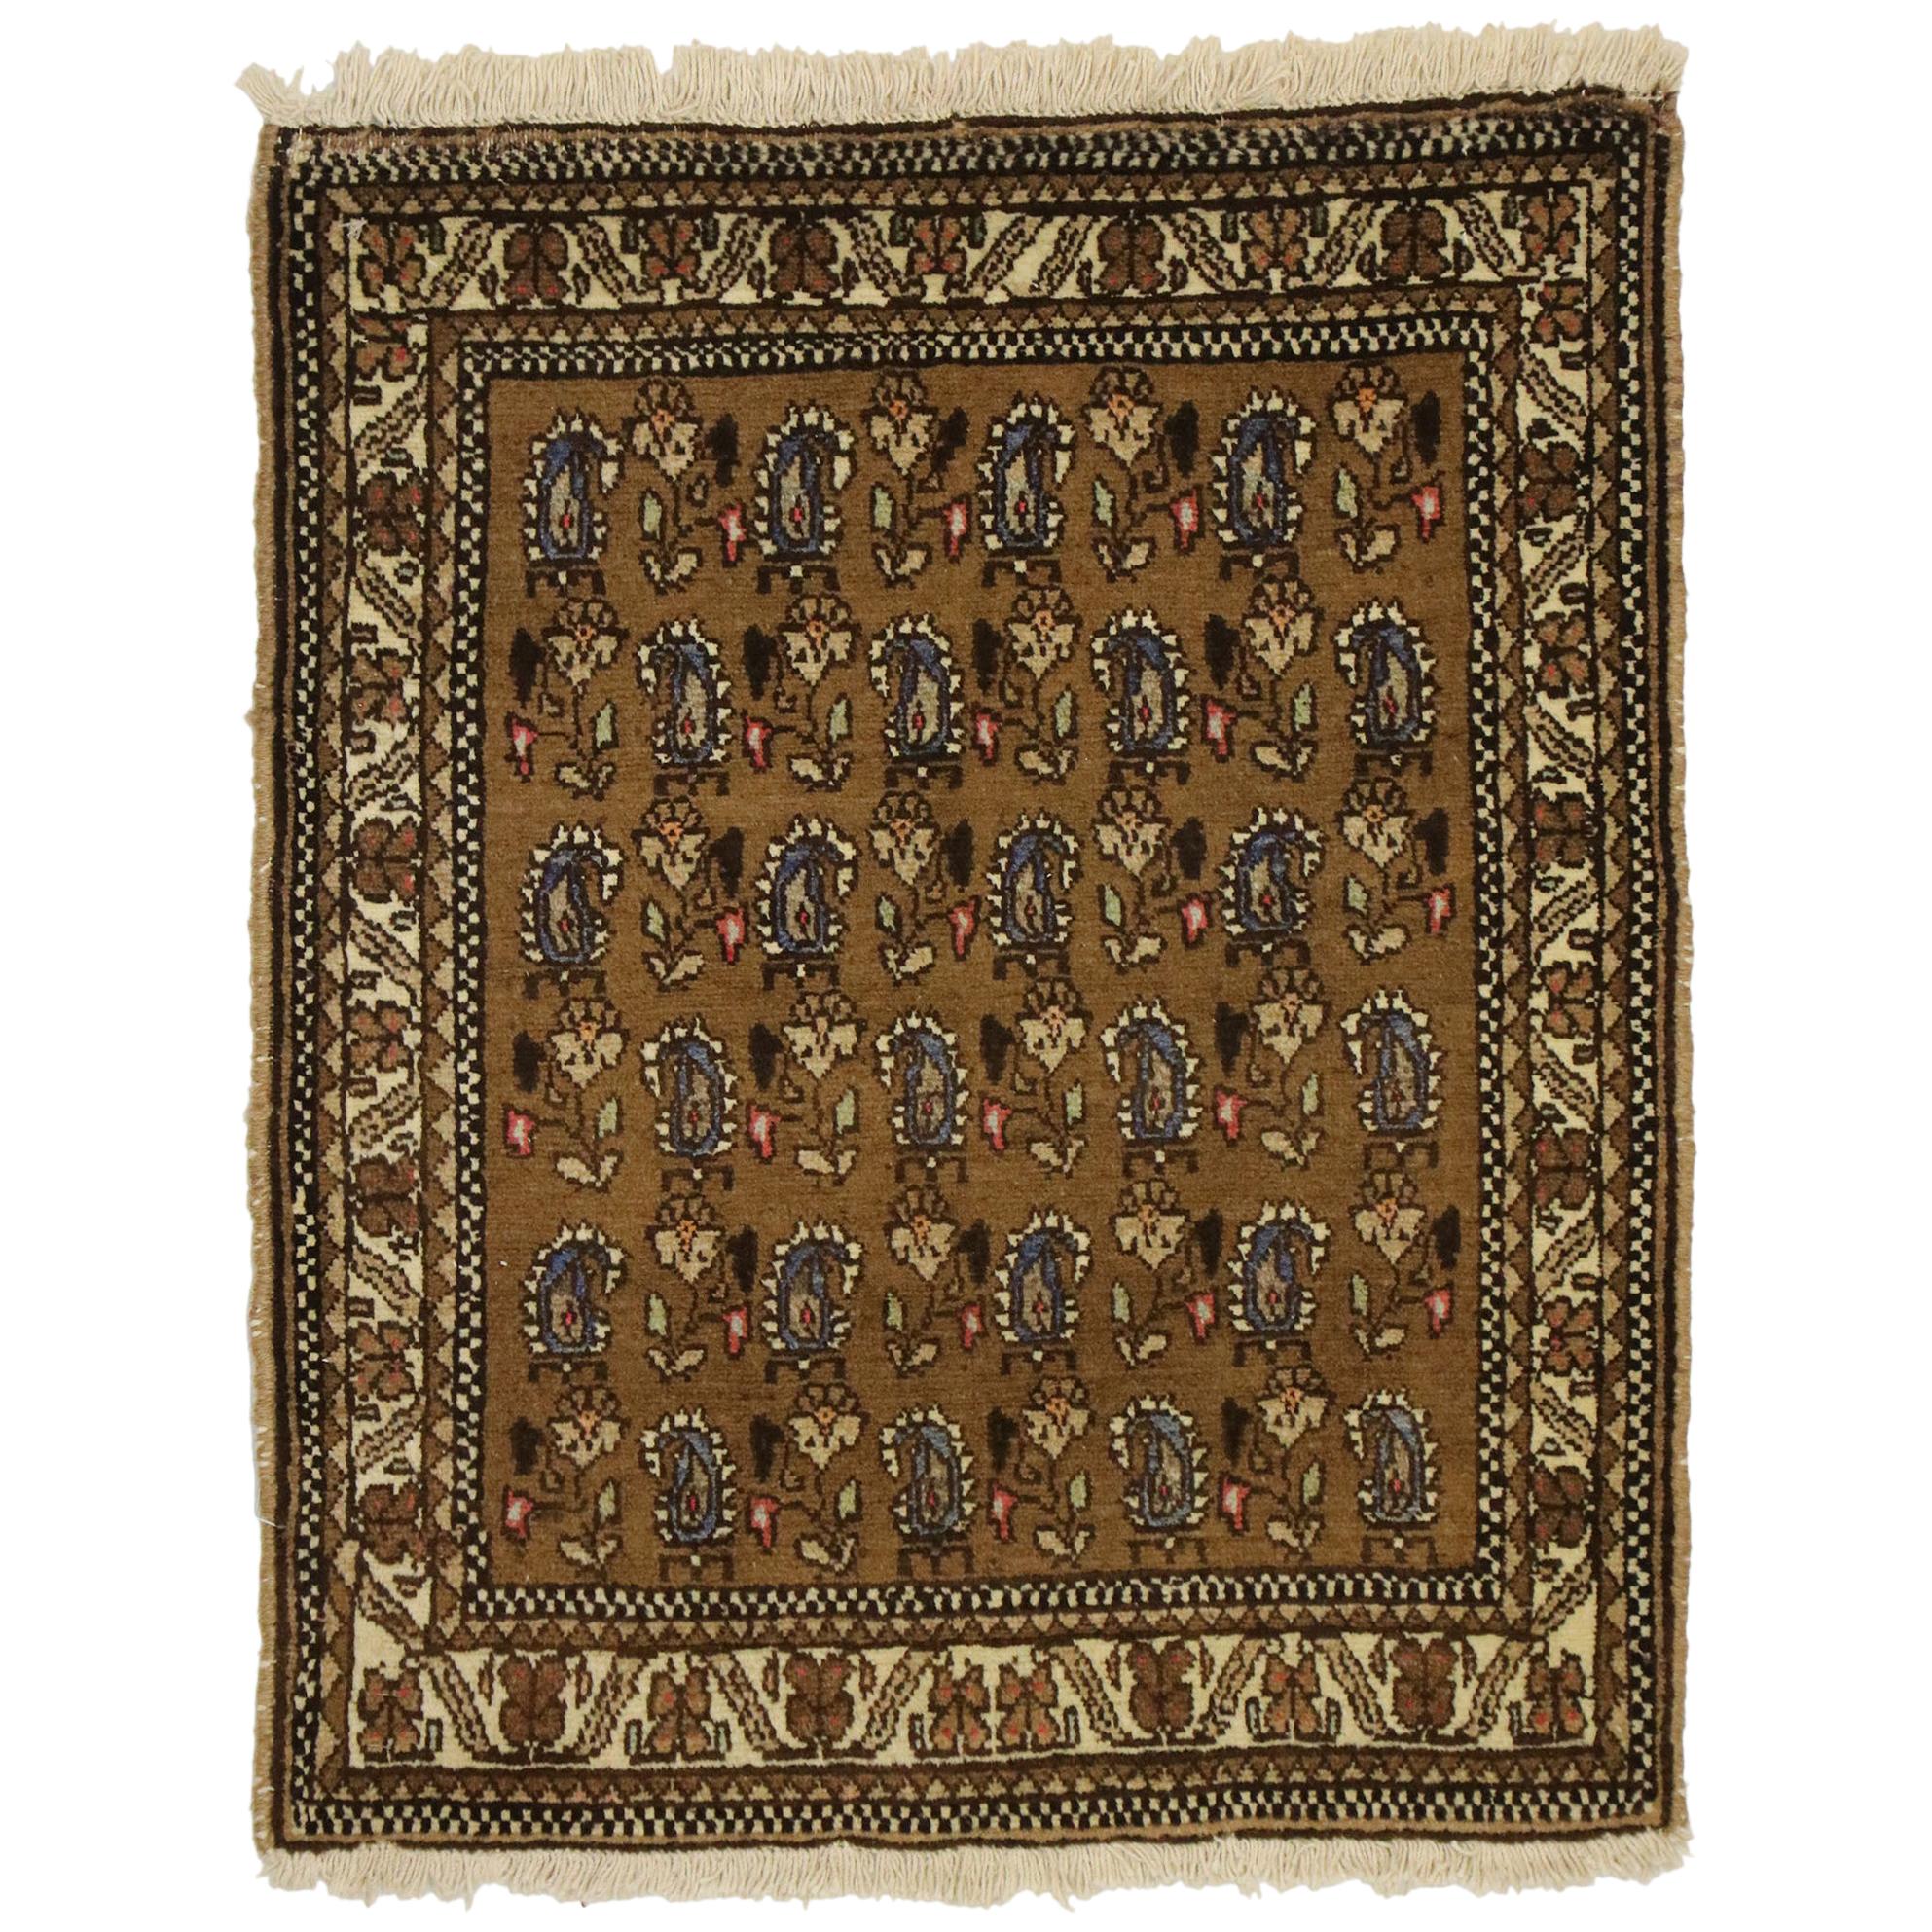 Vintage Persian Mashhad Scatter Rug with Mid-Century Modern Style